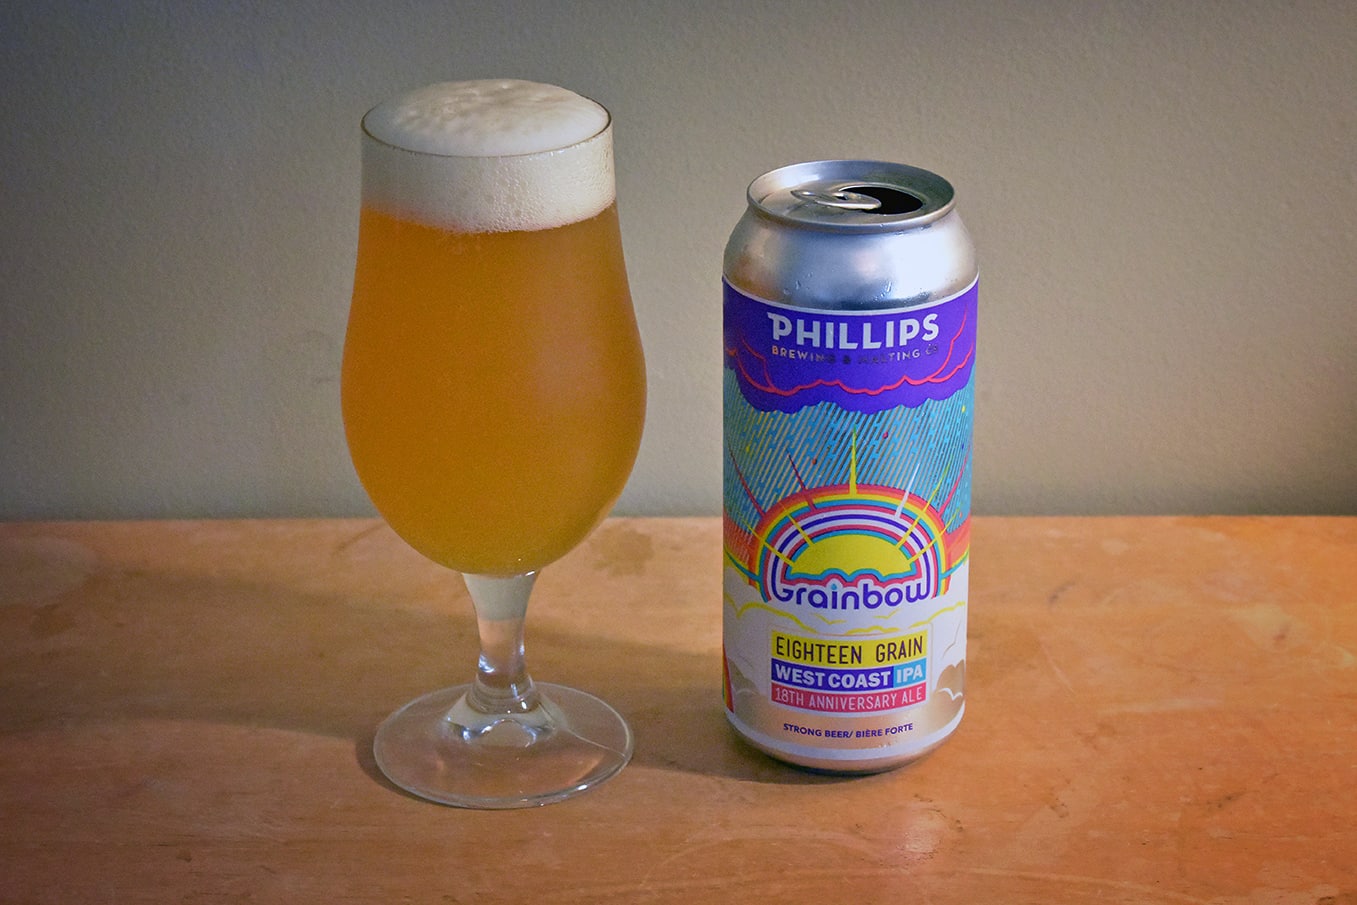 Grainbow by Phillips Brewing & Malting Co.